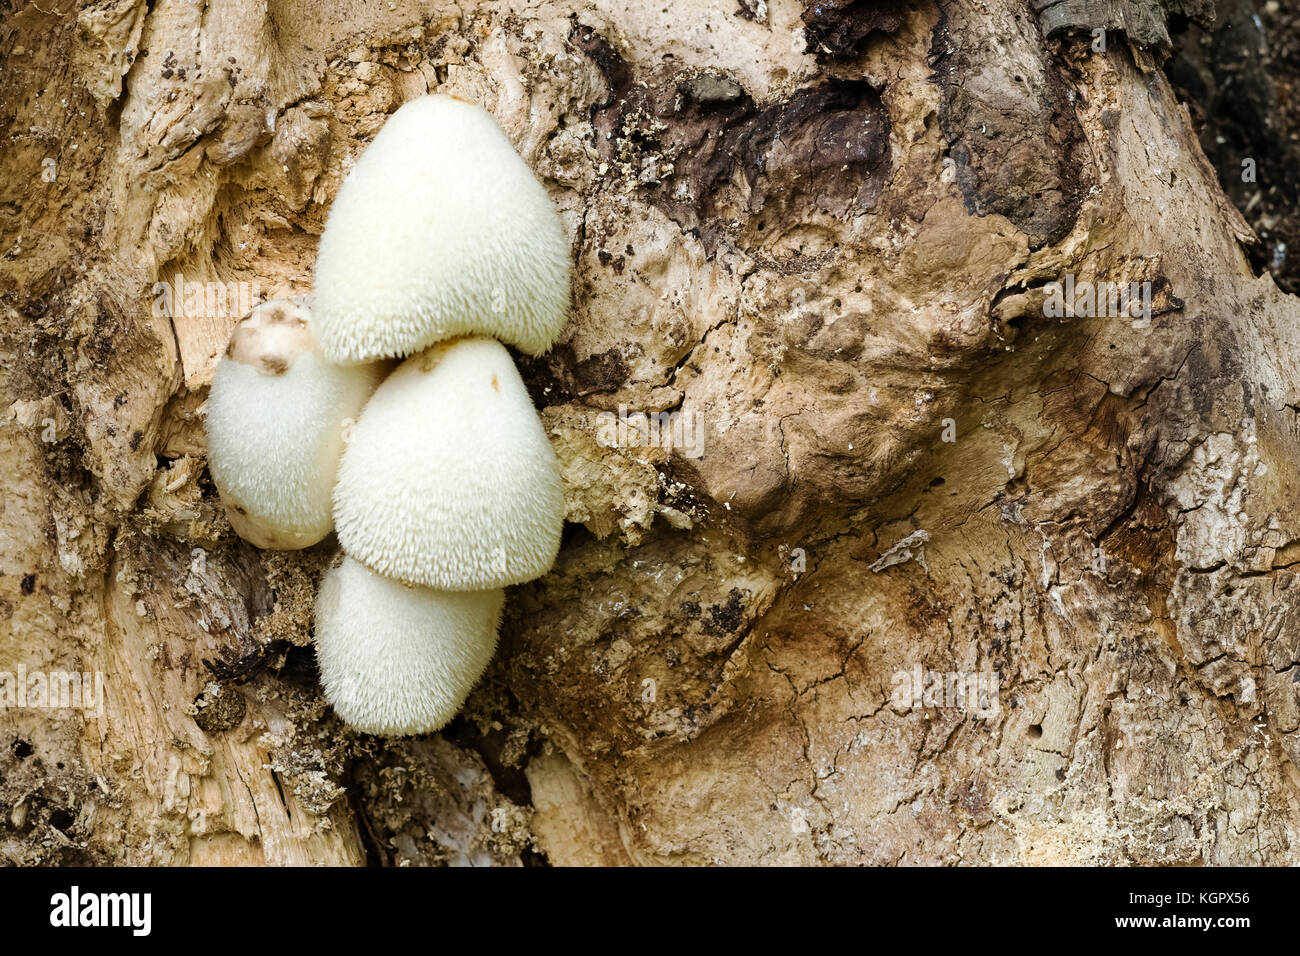 A cluster of rare Silky Sheath mushrooms, Newton-on-Ouse, Yorkshire, UK Stock Photo